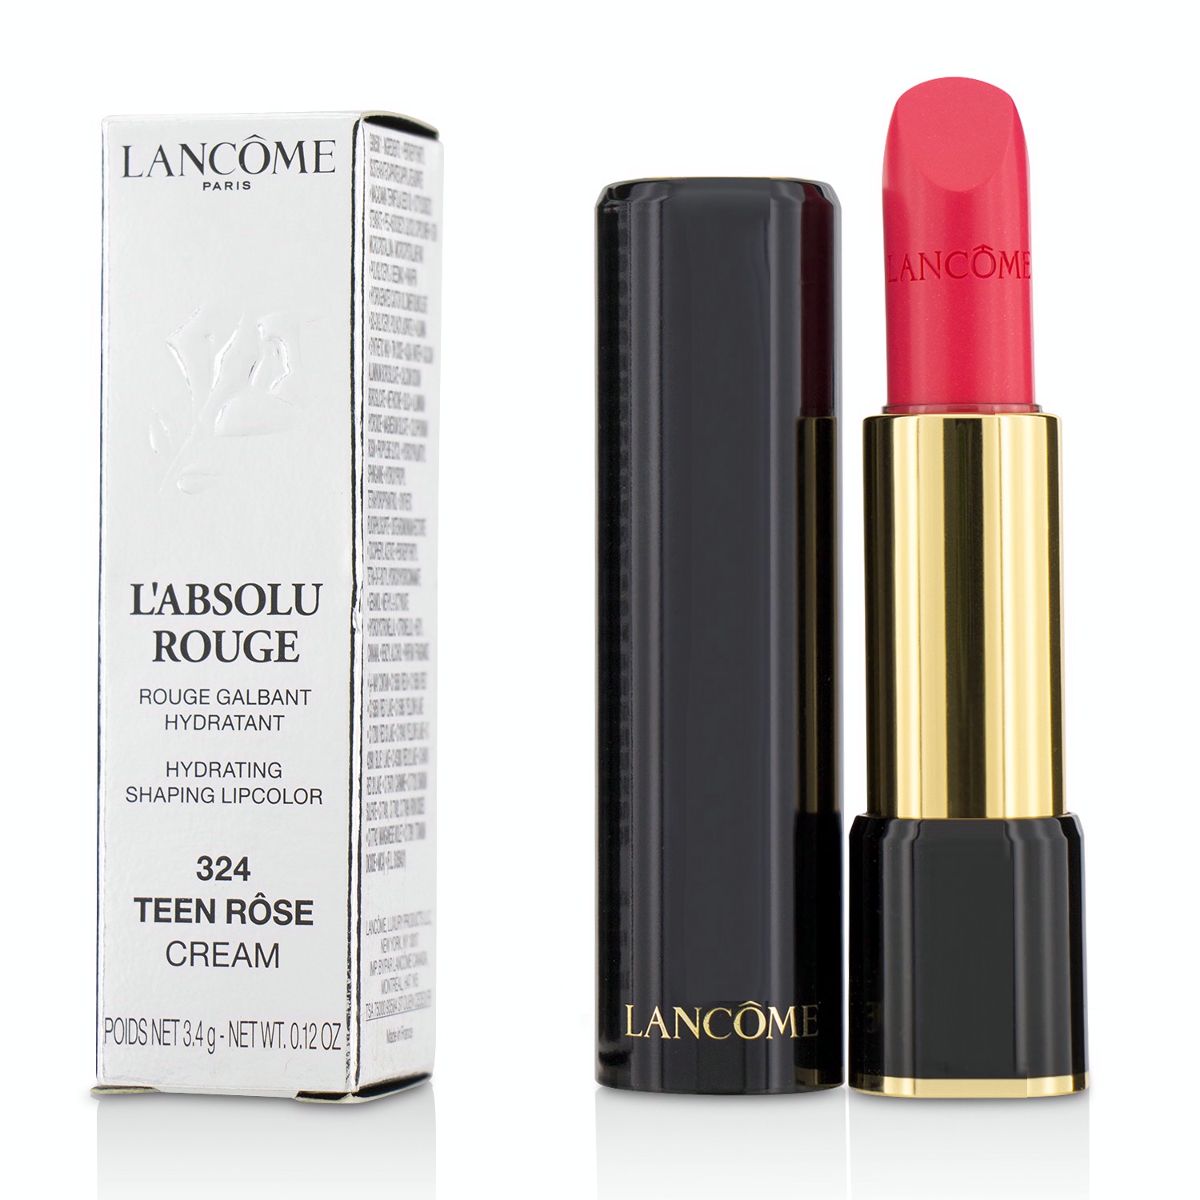 L Absolu Rouge Hydrating Shaping Lipcolor - # 324 Teen Rose (Cream) Lancome Image